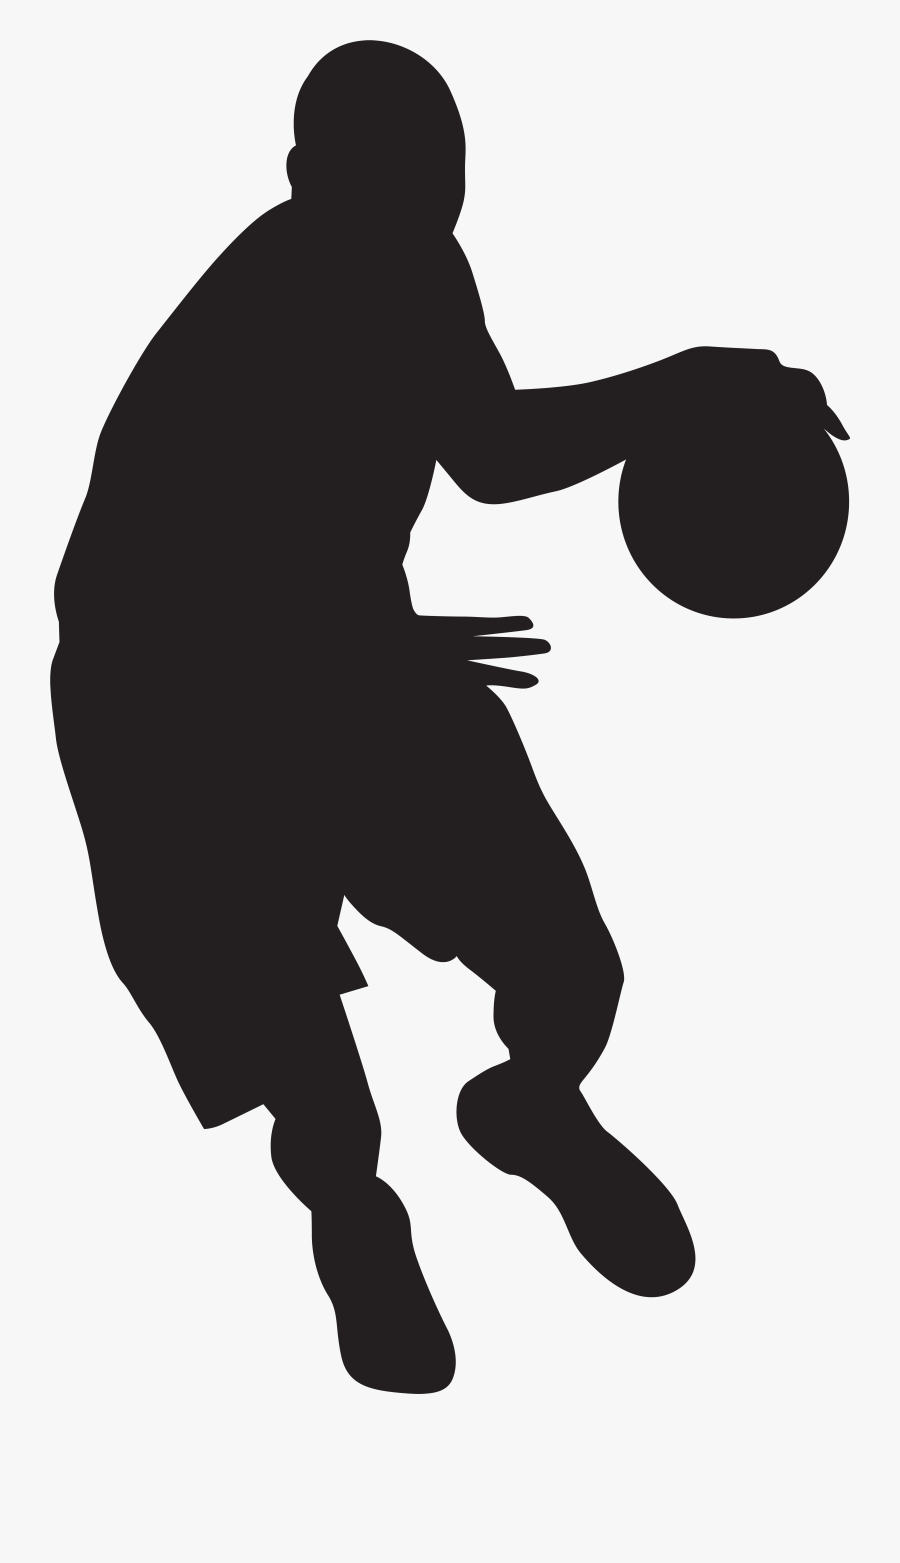 Clip Art Basketball Player Silhouette Png - Transparent Background Basketball Player Clipart, Transparent Clipart